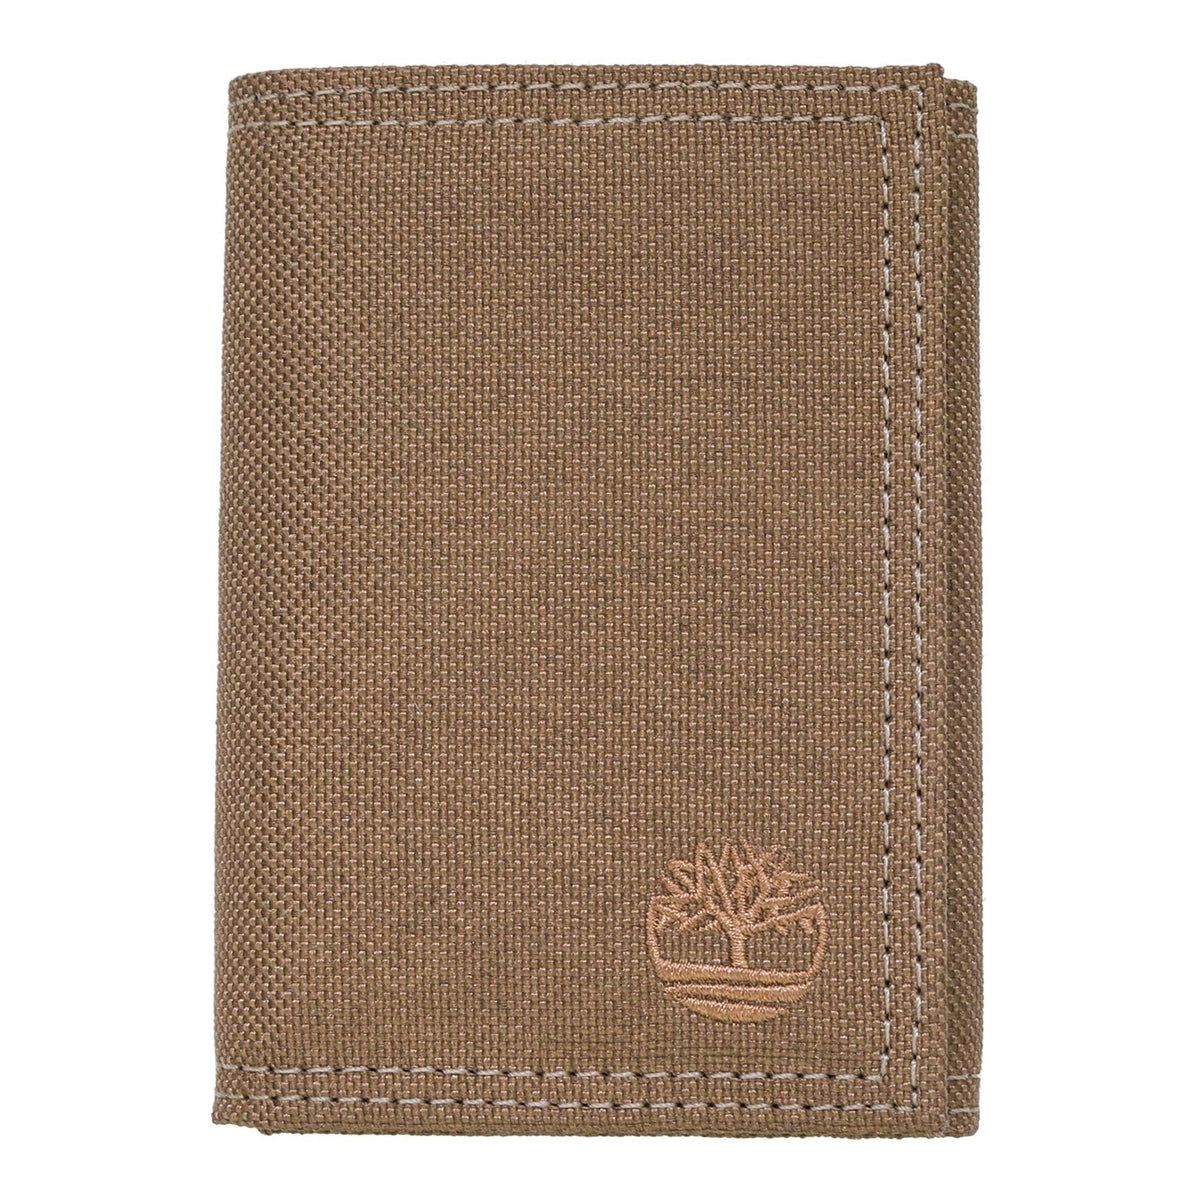 Timberland Nylon Embroidered Trifold Wallet